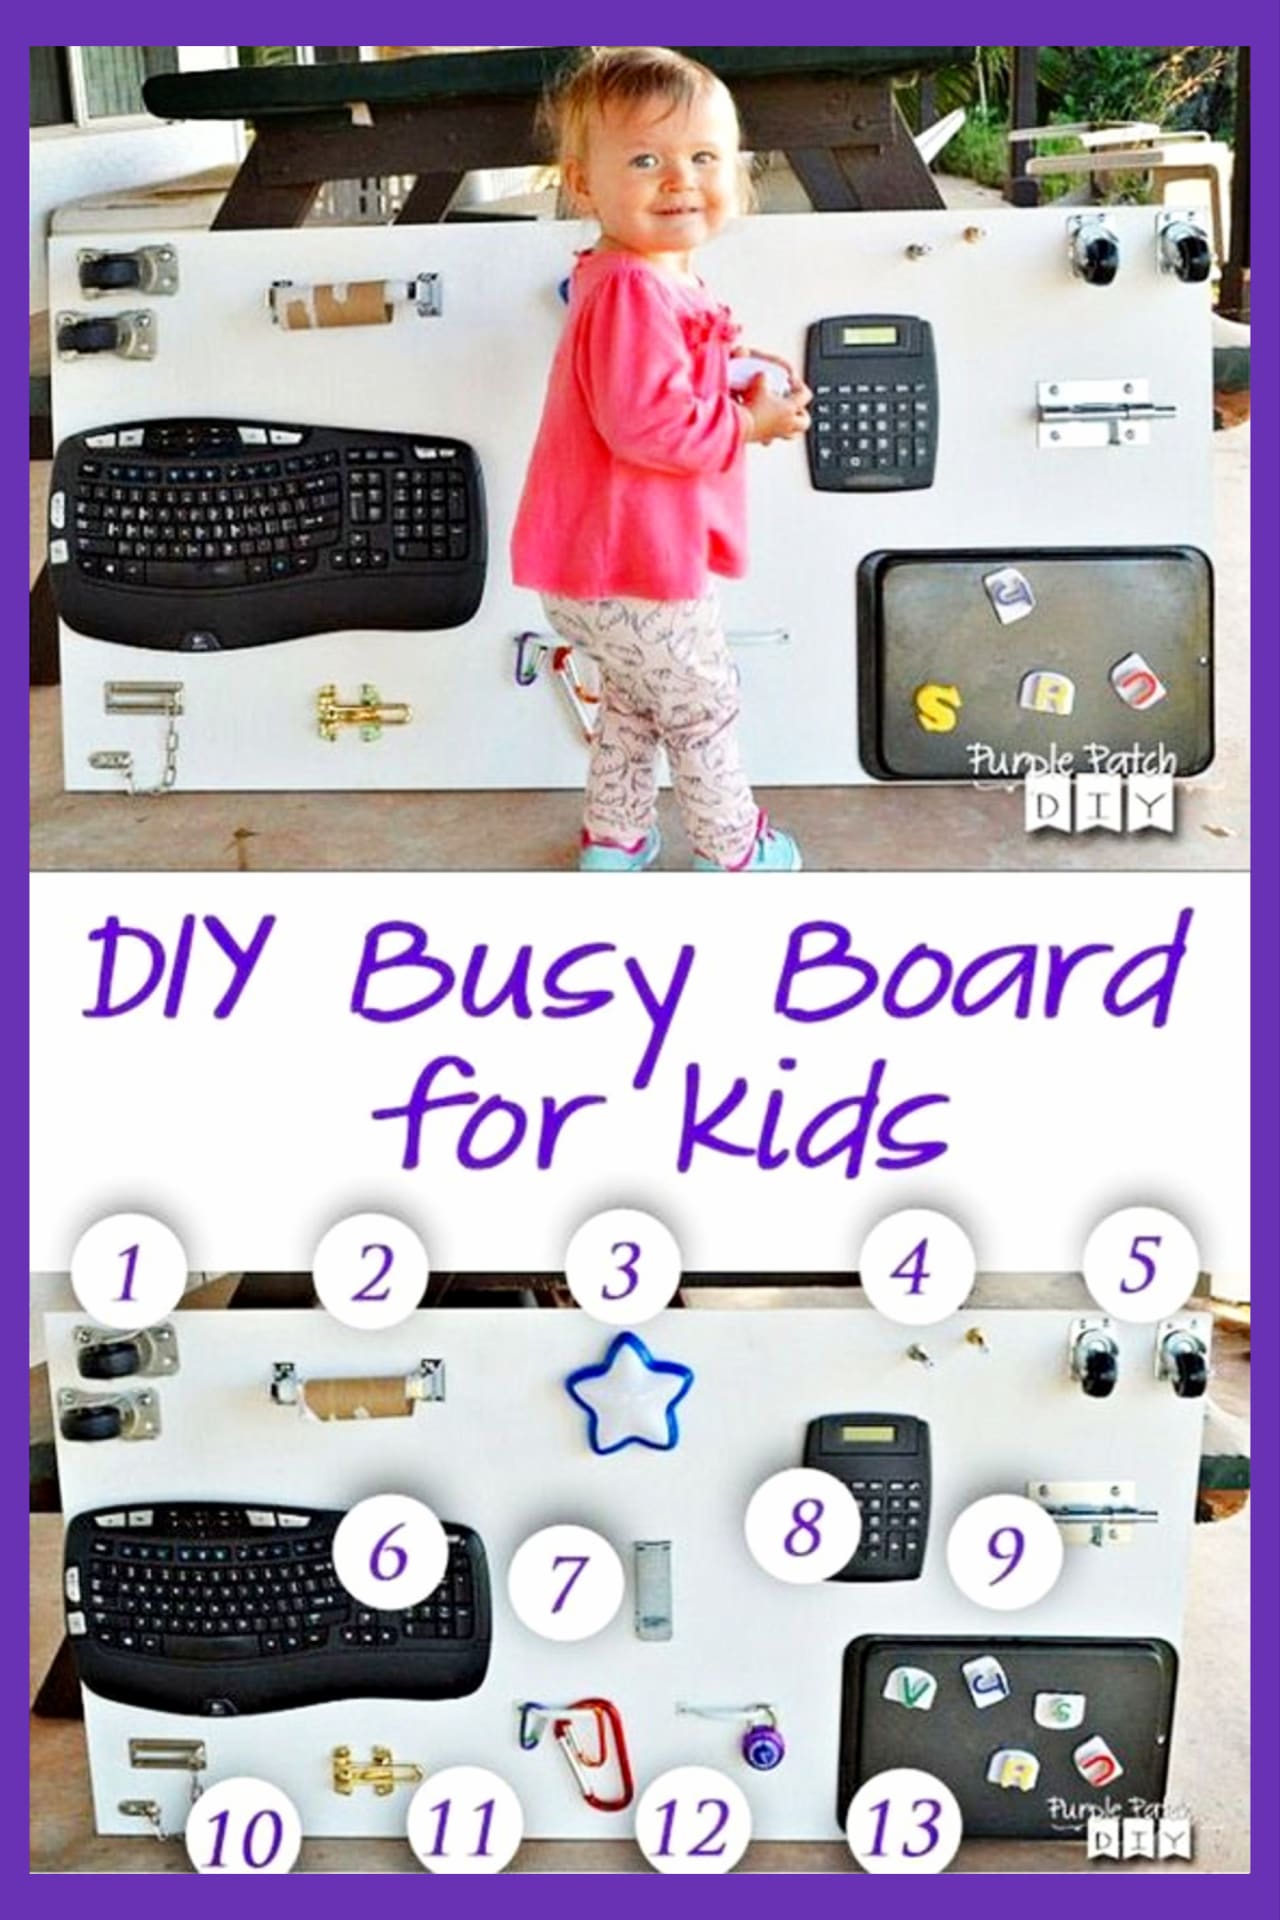 Toddler Sensory Board - love these sensory toys for toddlers and babies - this is the ultimate DIY sensory board!